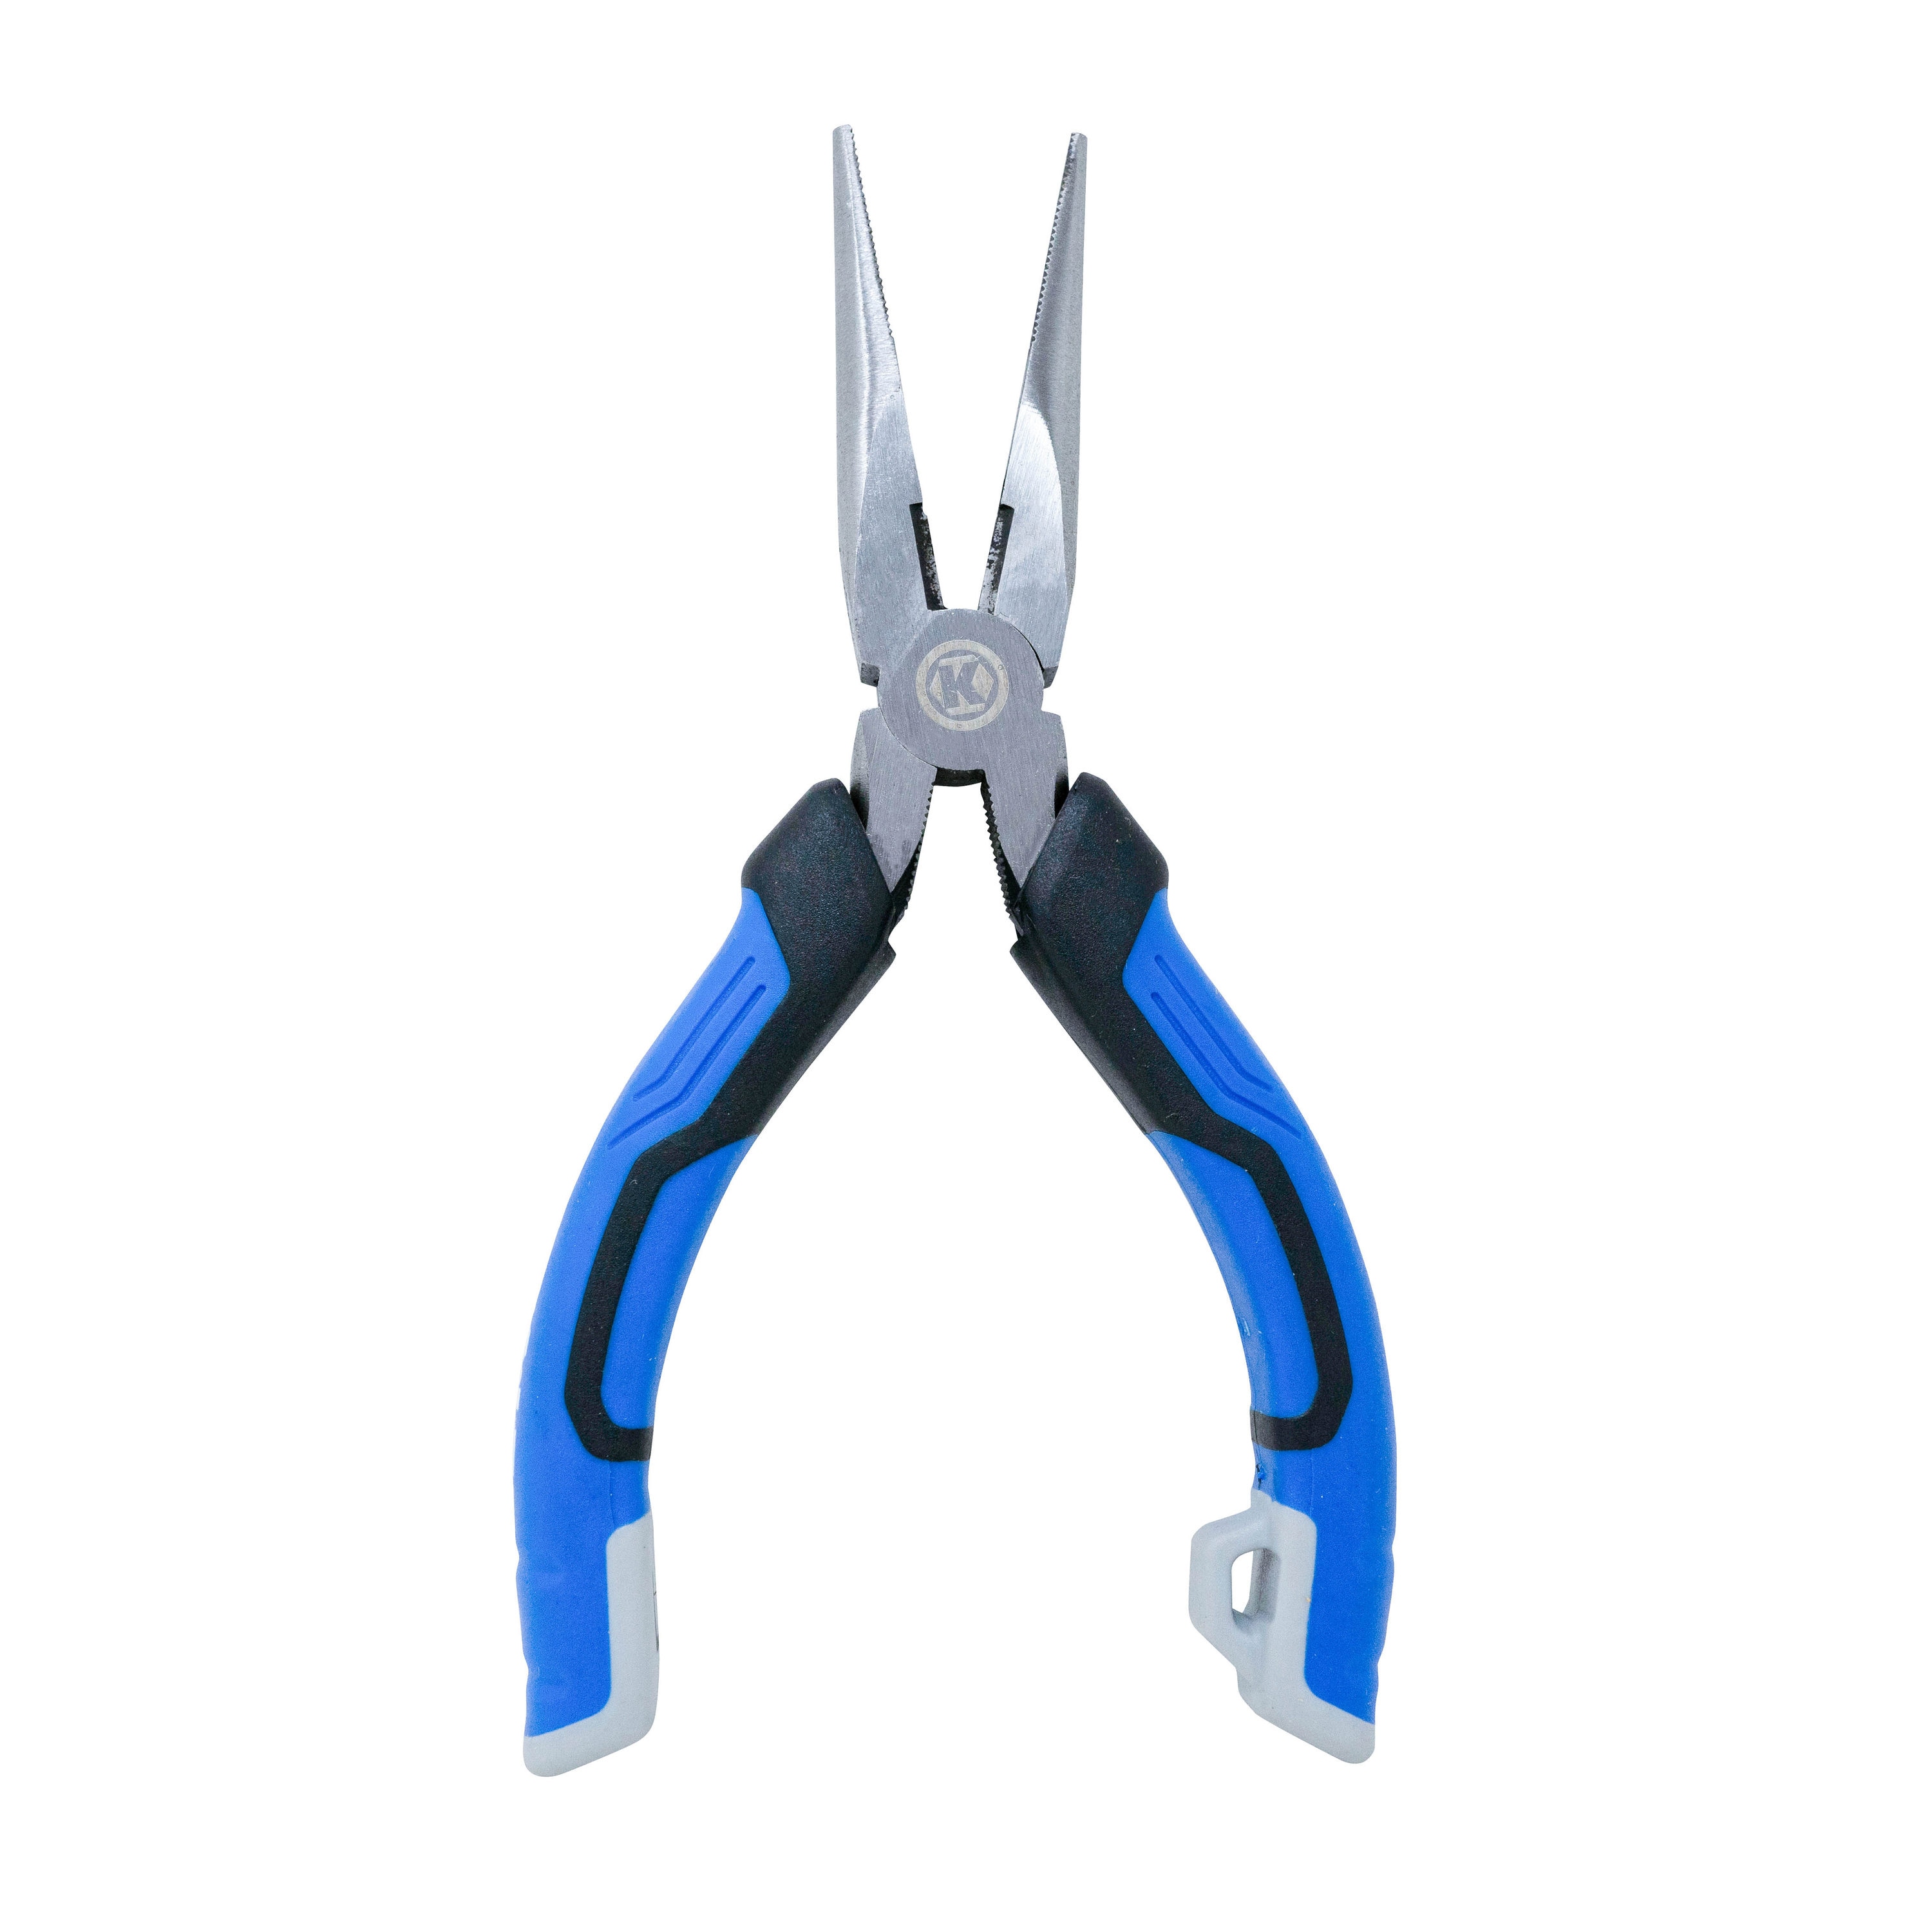 Buy JLS Small Chain Nose Pliers Online at $11.5 - JL Smith & Co